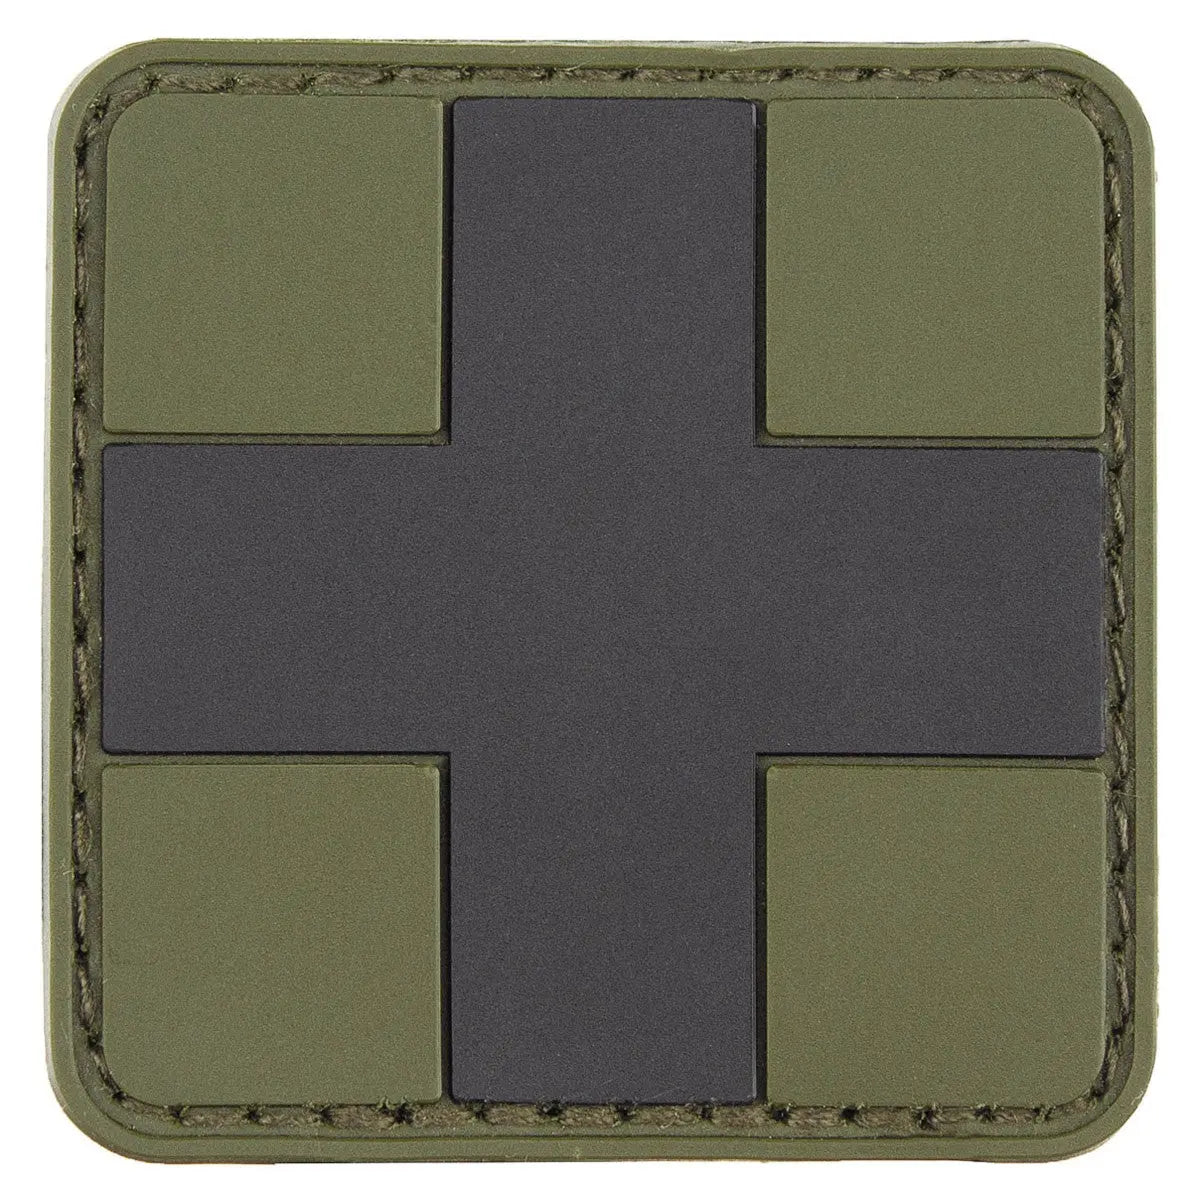 Velcro Patch, "FIRST AID", OD green-black, 3D, 5 x5 cm NSO Gear